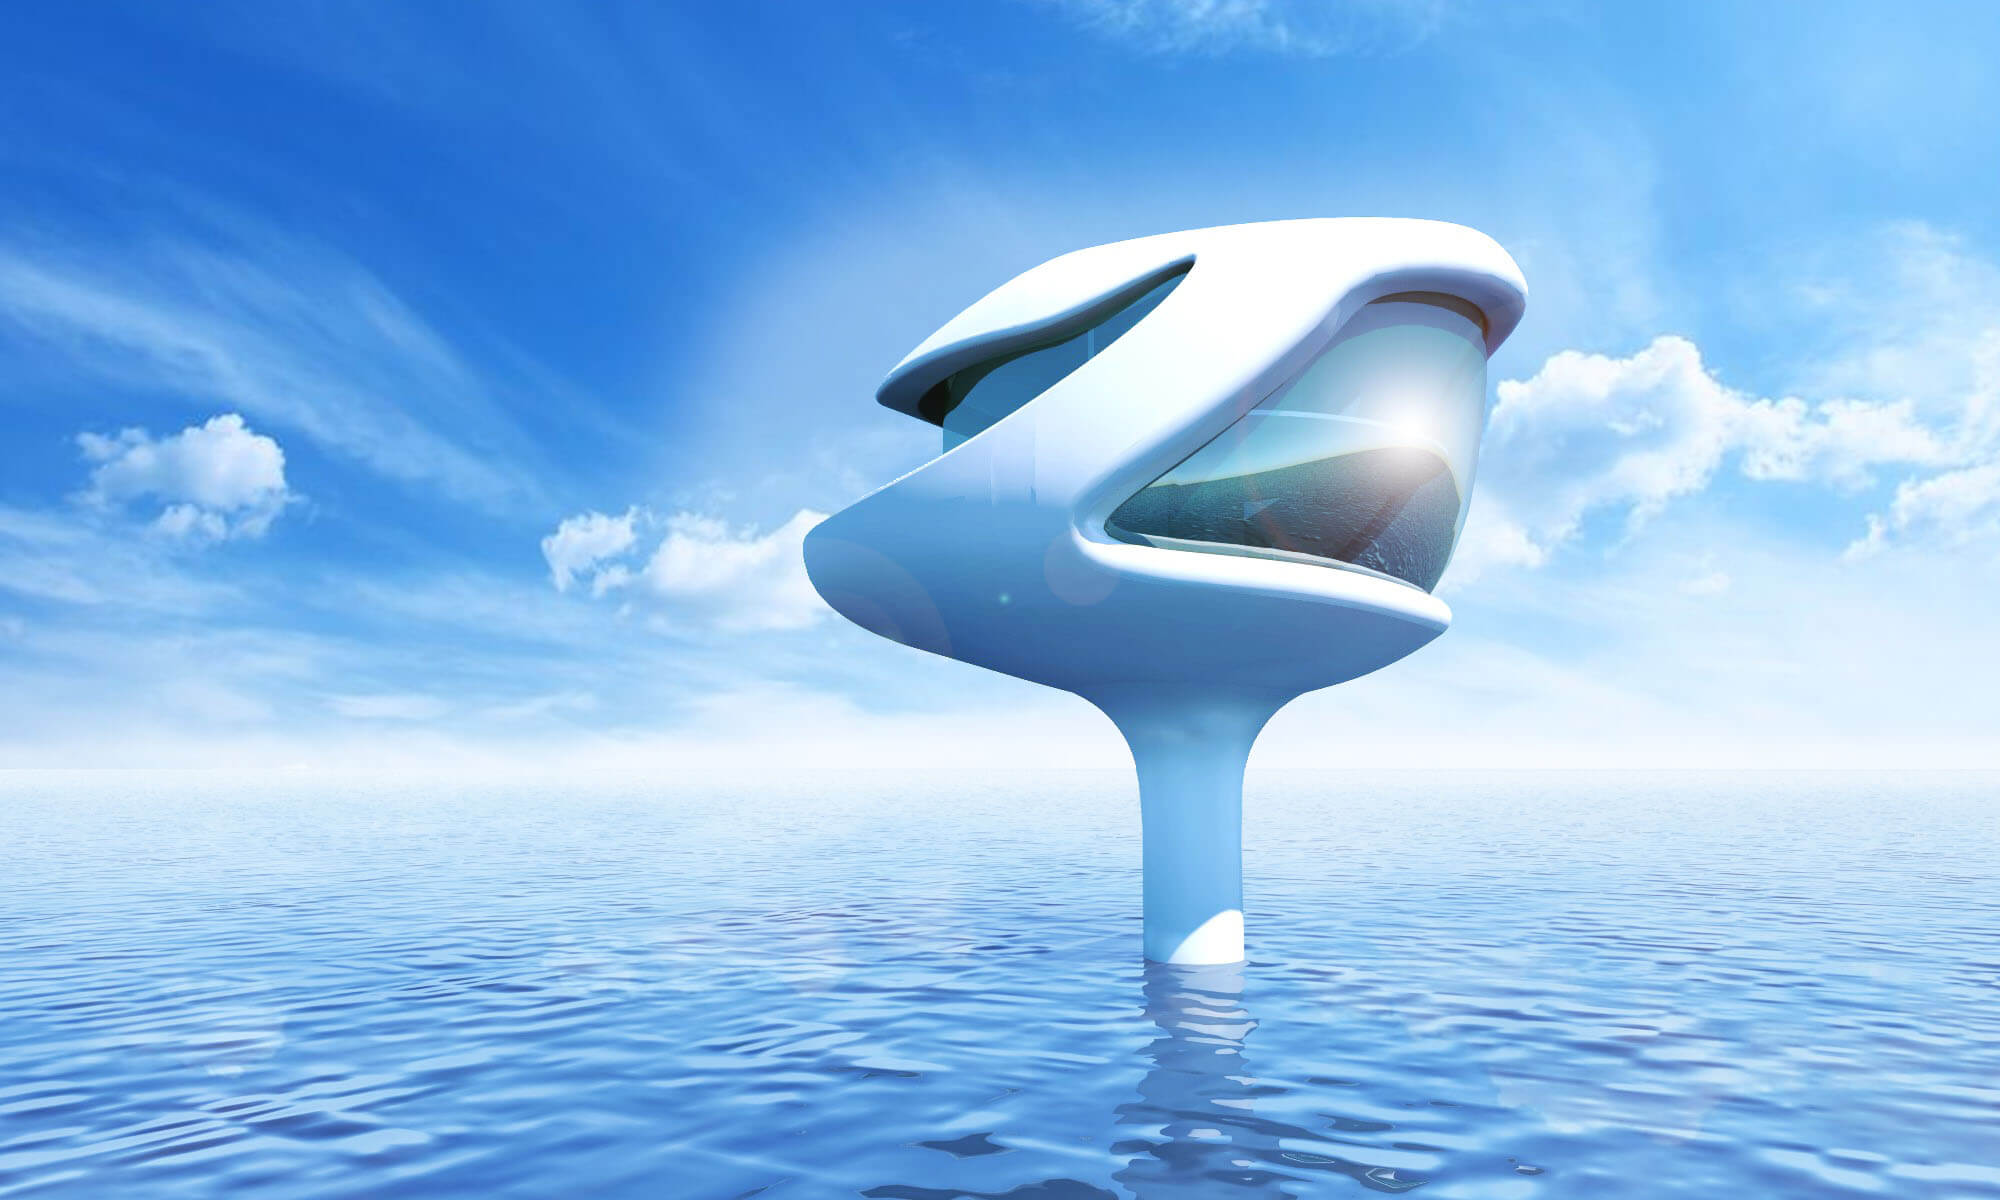 Forget Yachts. These Floating Homes Will Give You A Luxe Eco-Friendly Residence On The Sea.